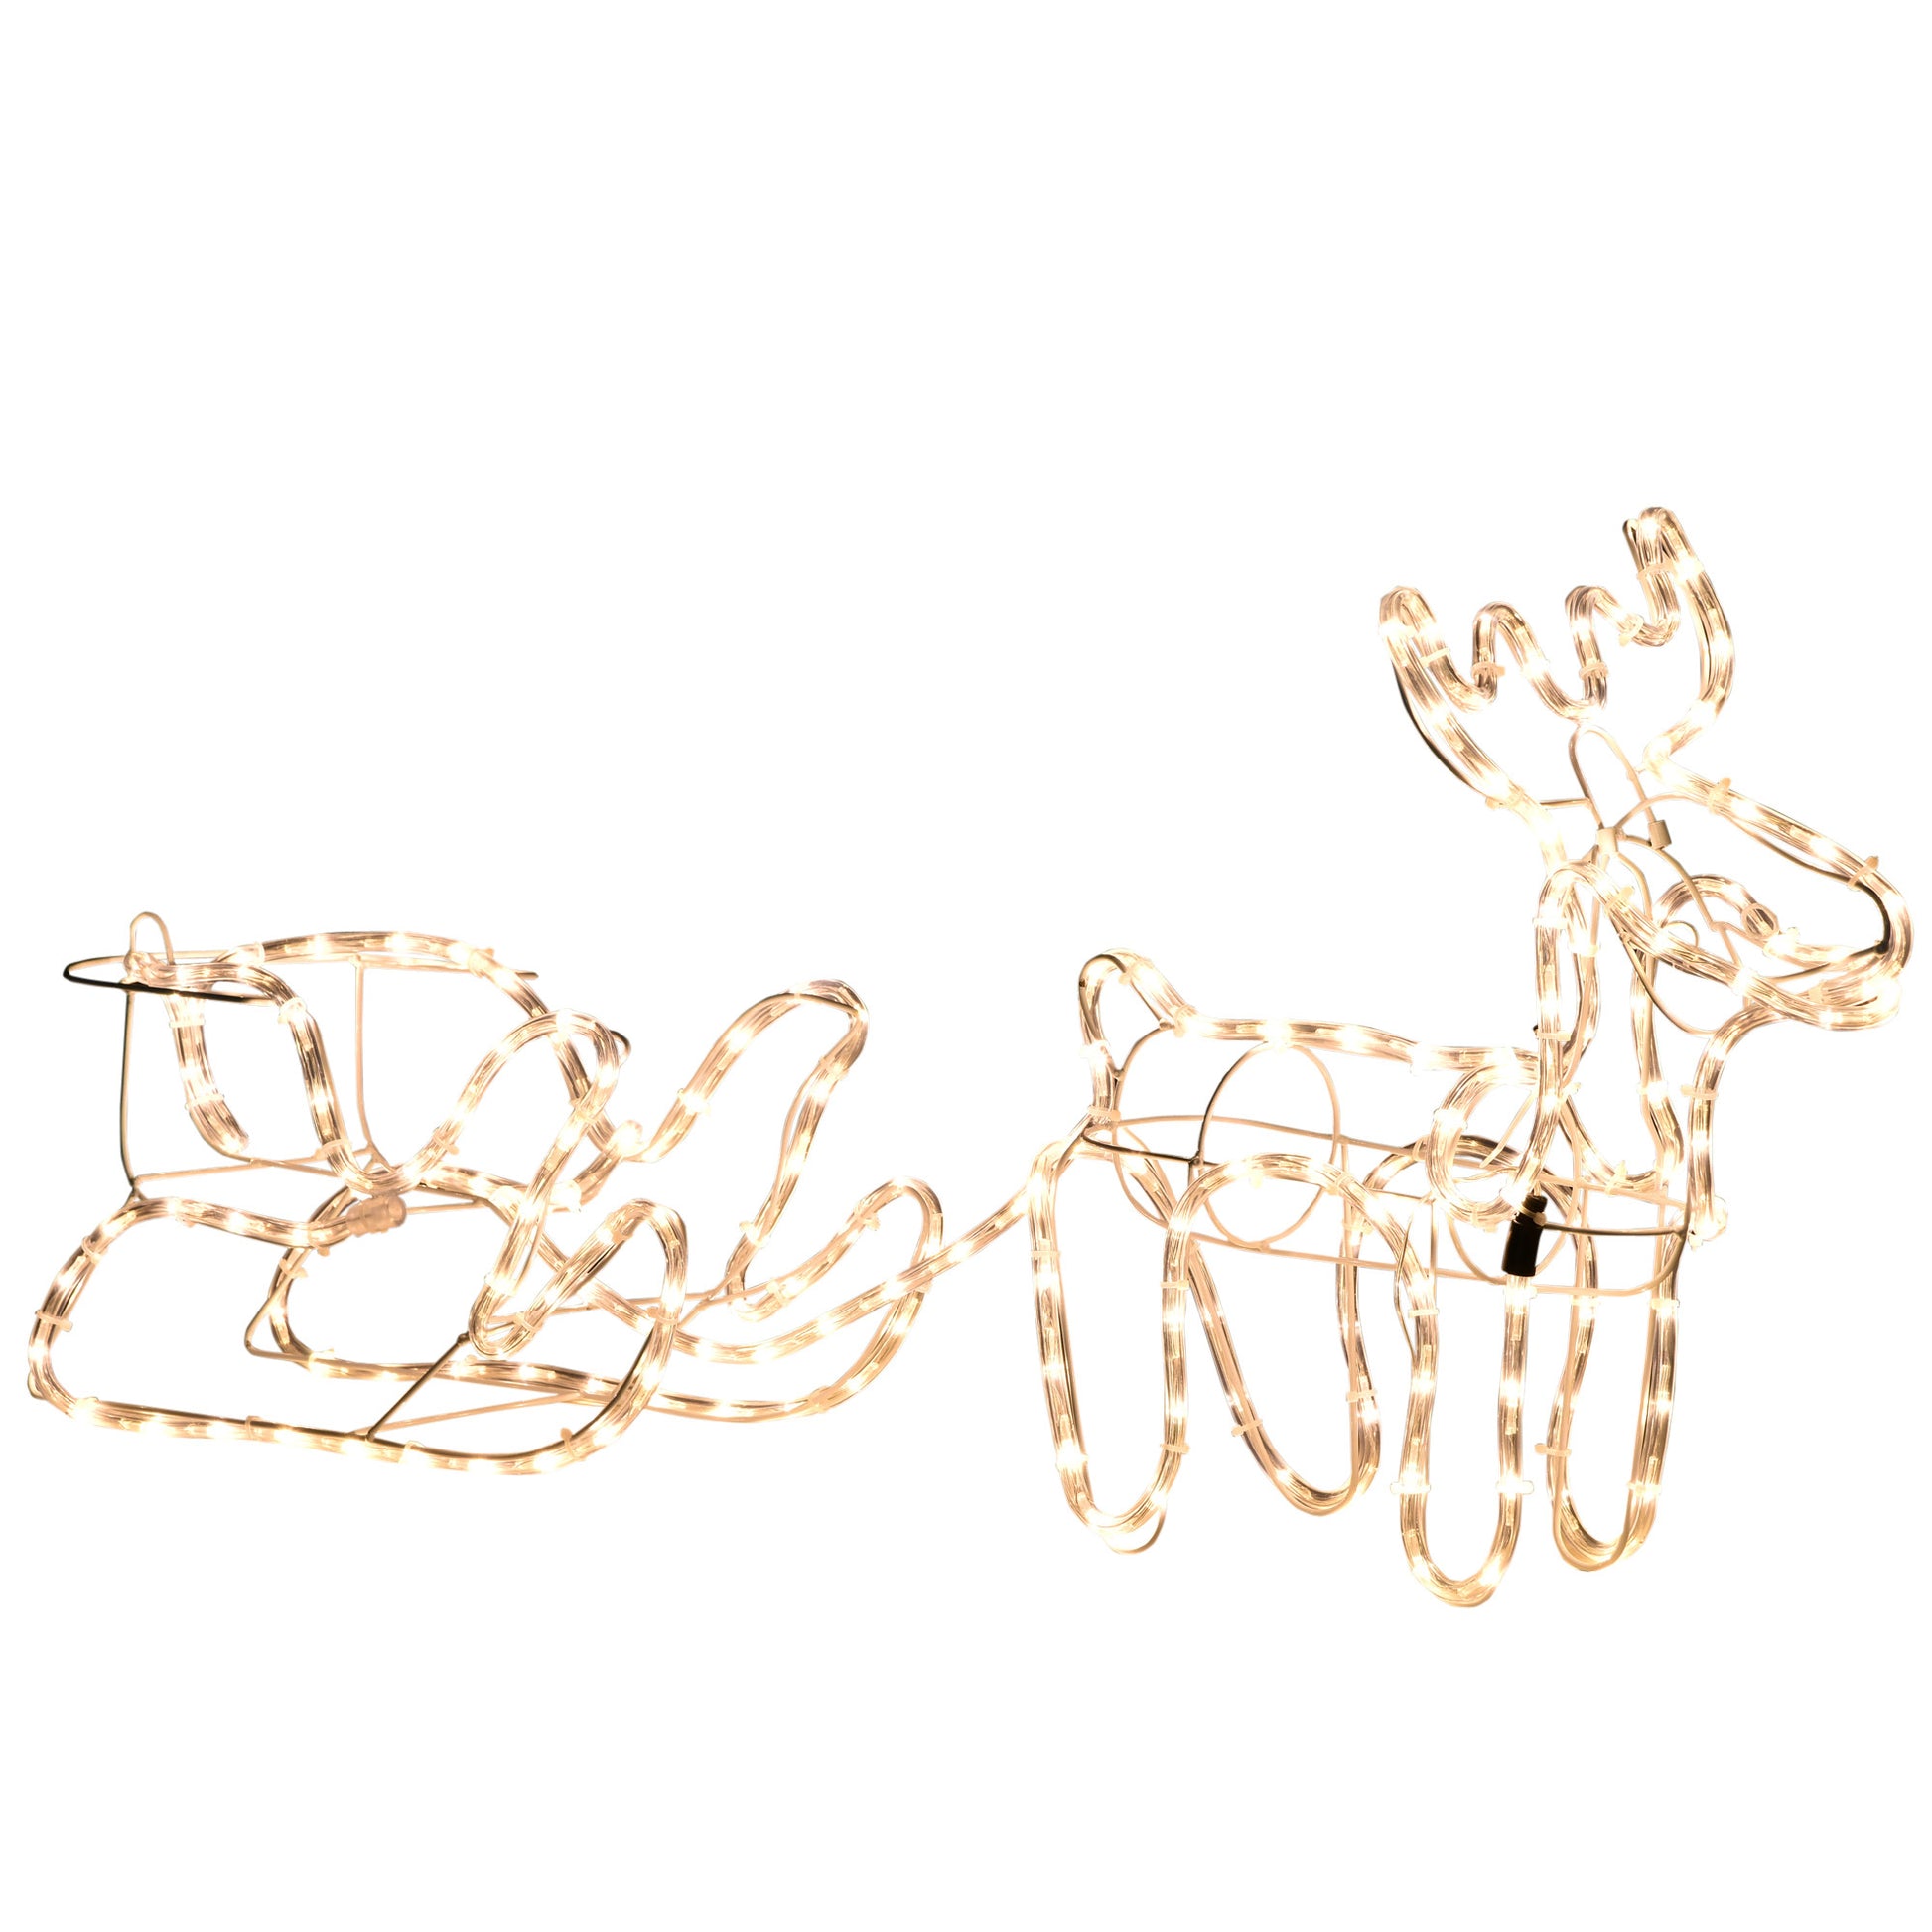 Outsunny 35" Led Reindeer Sleigh Outdoor